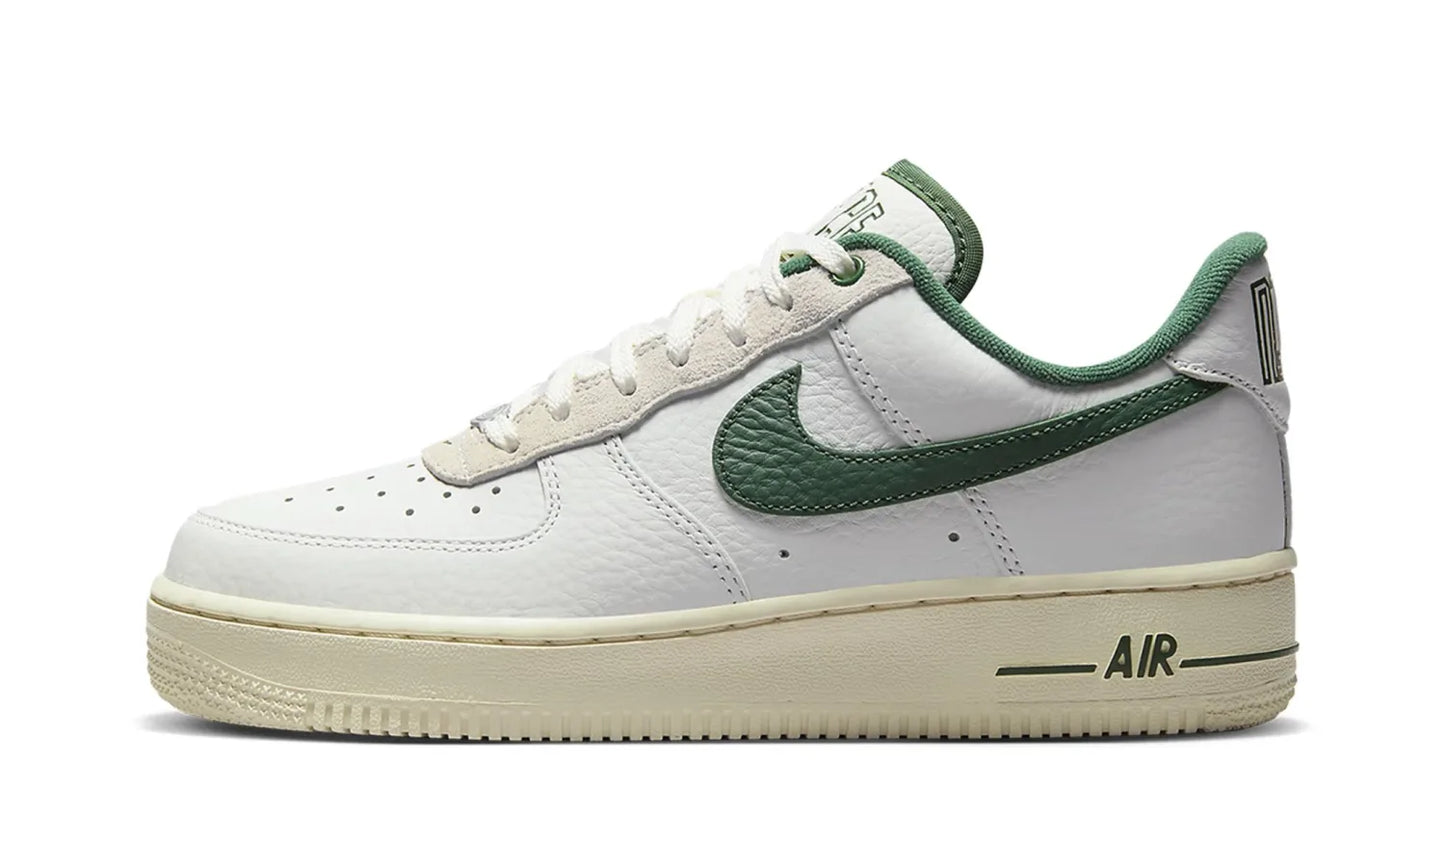 Nike Air Force 1 Low '07 LX Command Force Gorge Green (Women's)